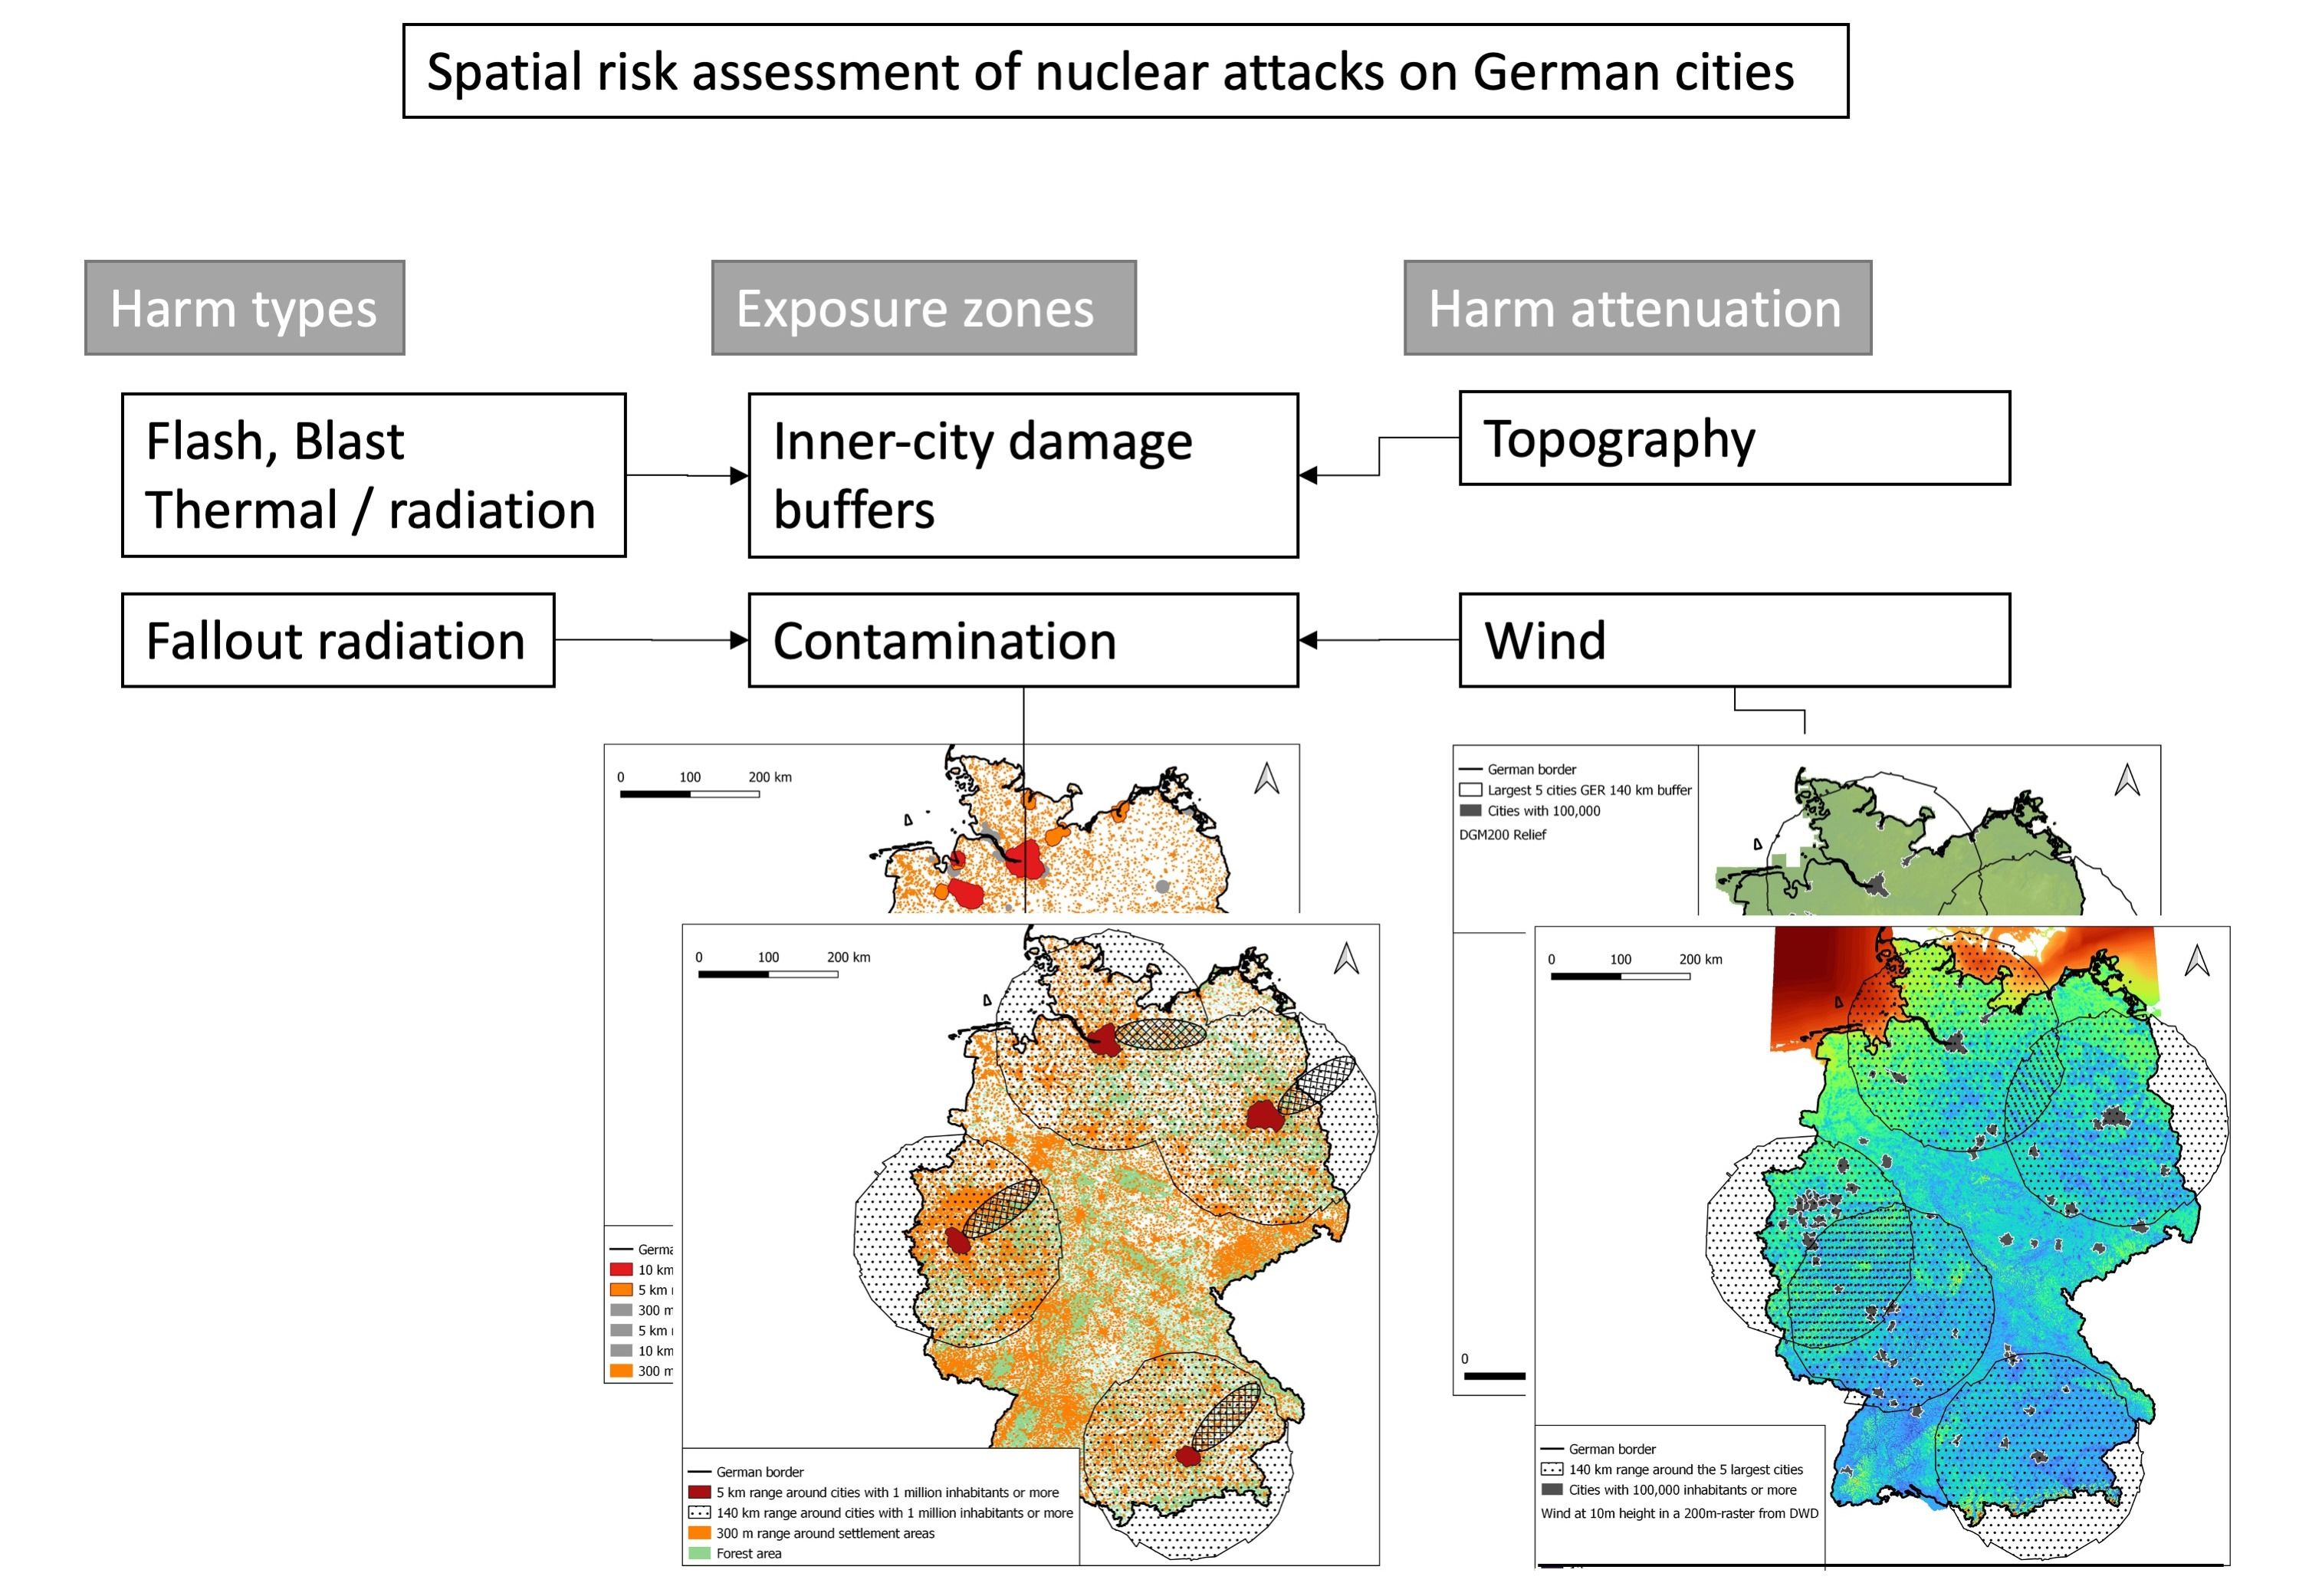 Challenges | Free Full-Text | Safe from Harm? Massive Attack Nuclear  Worst-Case Scenario for Civil Protection in Germany Regarding High-Risk  Zones of Exposure, Vulnerability, and Safe Havens